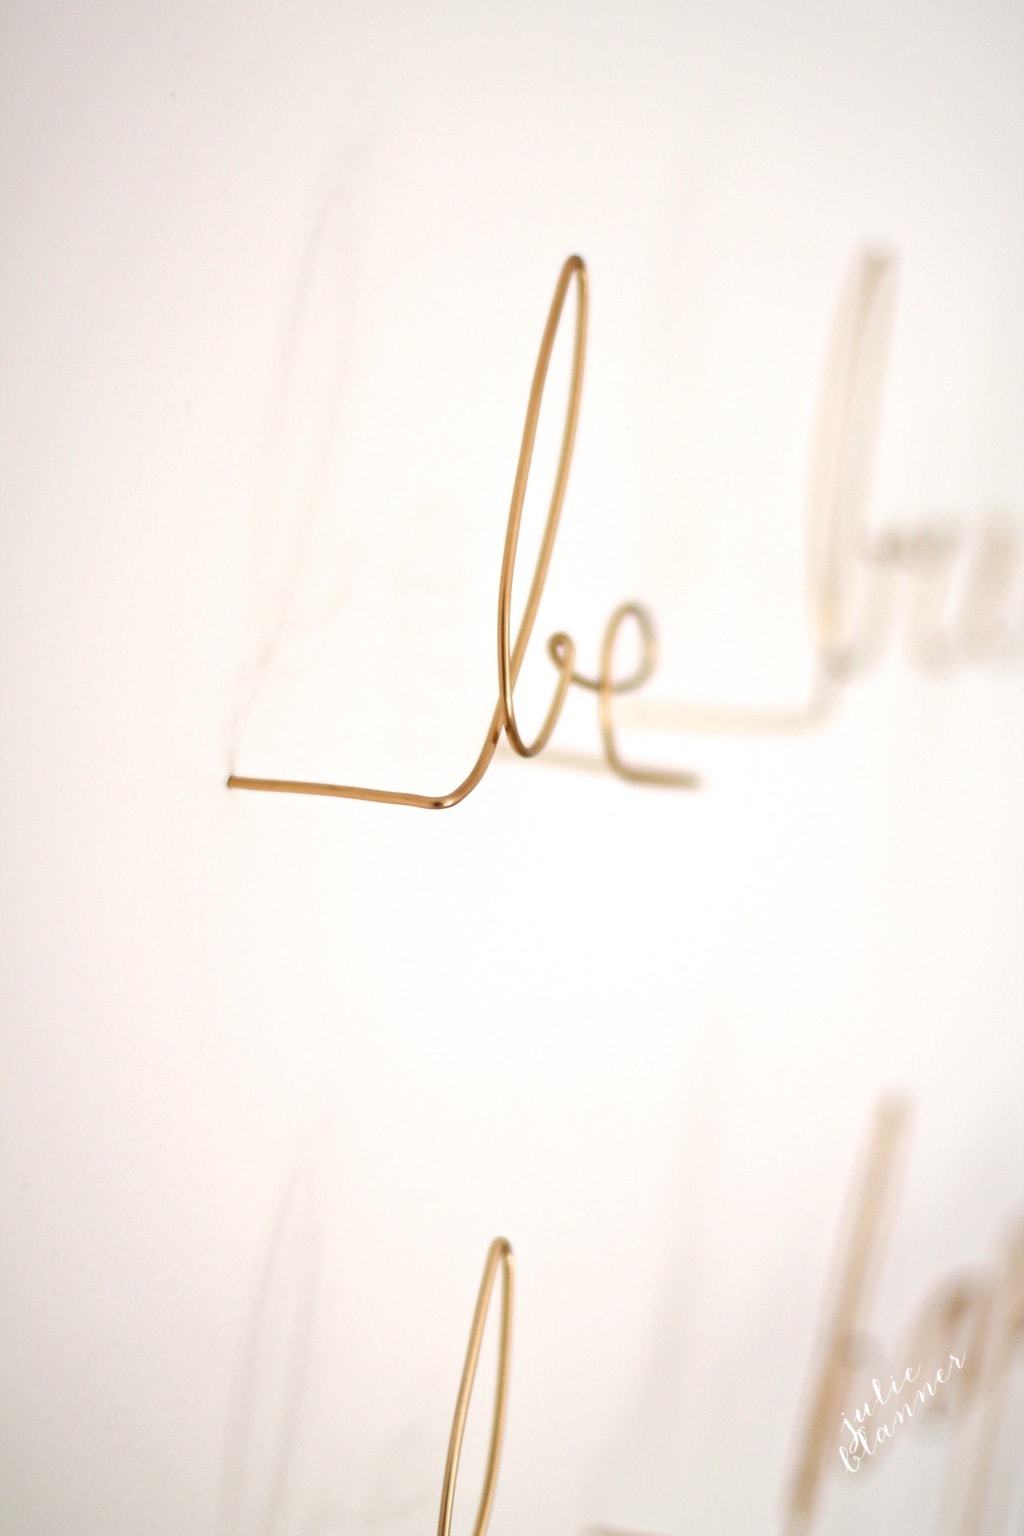 Gold wire wall art shaped into the words "be bright be happy be you"